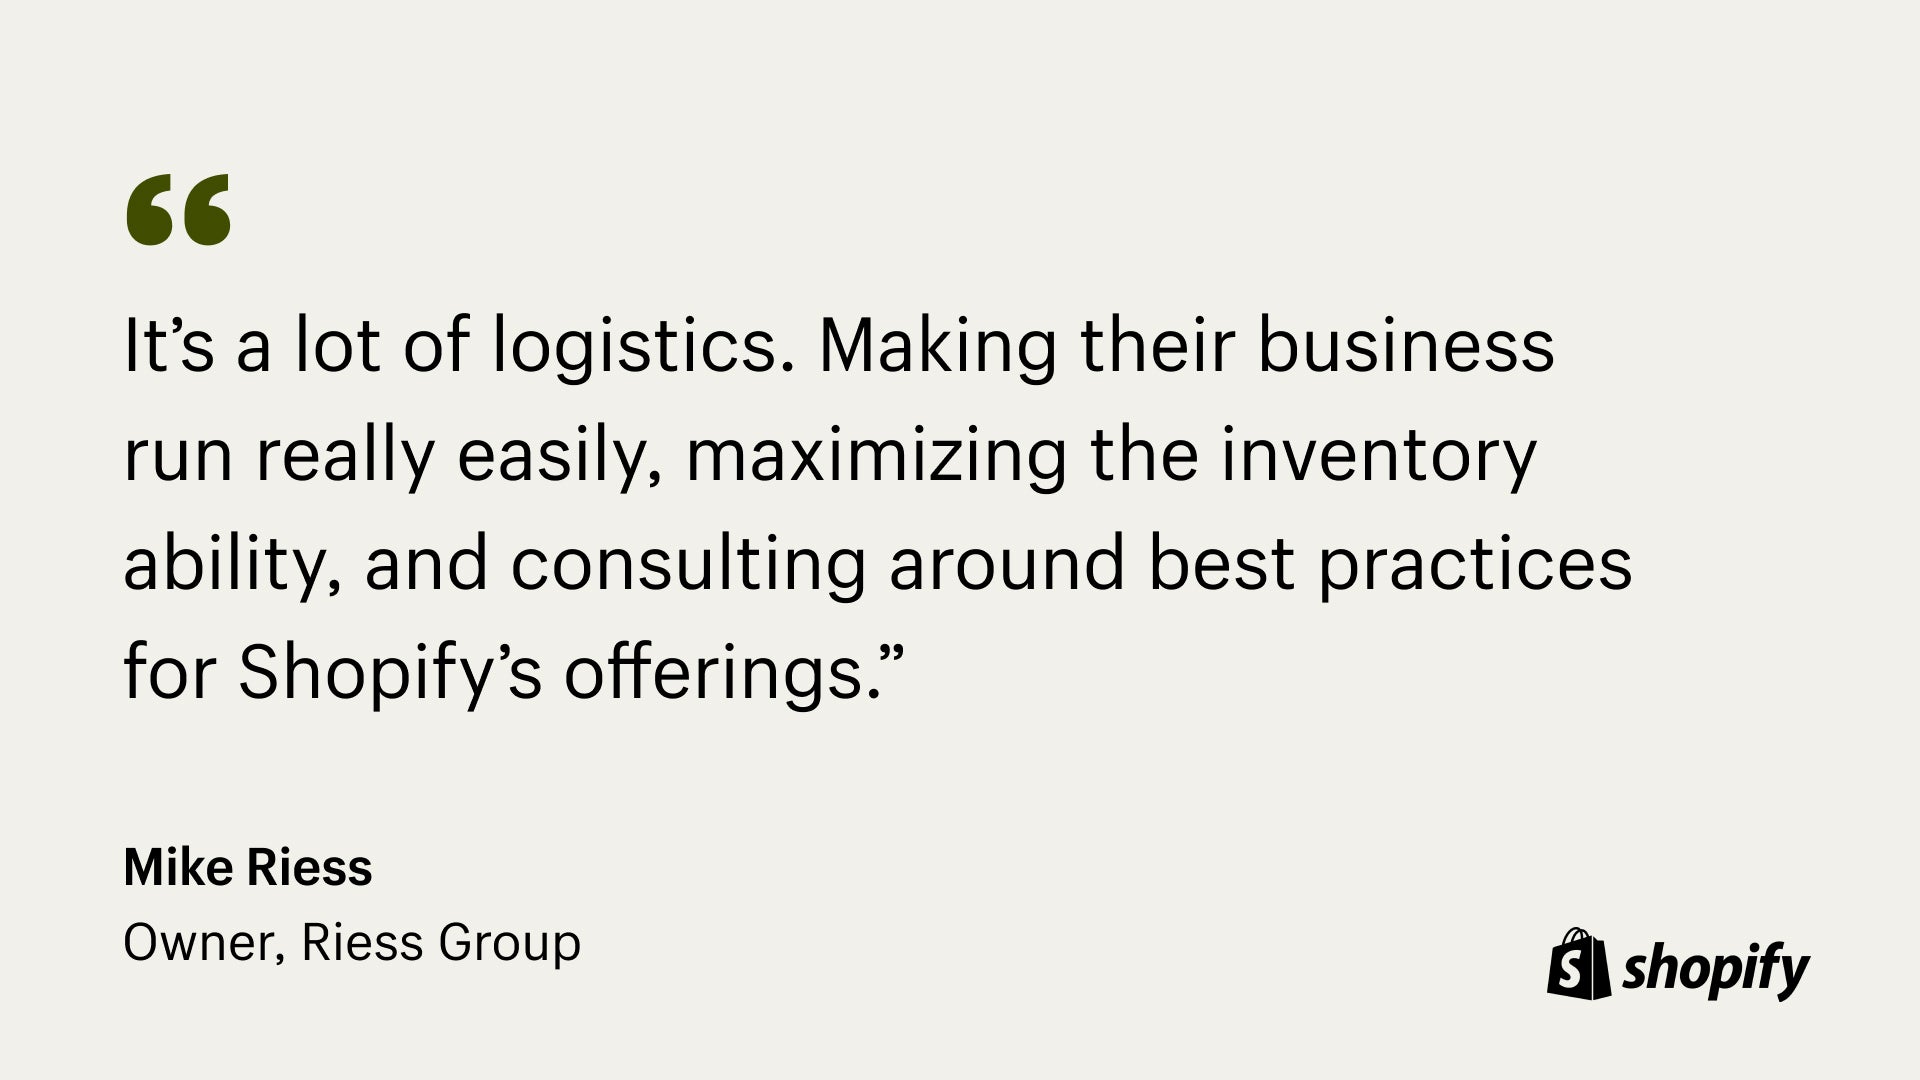 Image of quote from Mark Riess, owner of Riess, that states, "It’s a lot of logistics. Making their business run really easily, maximizing the inventory ability, and consulting around best practices for Shopify’s offerings.”